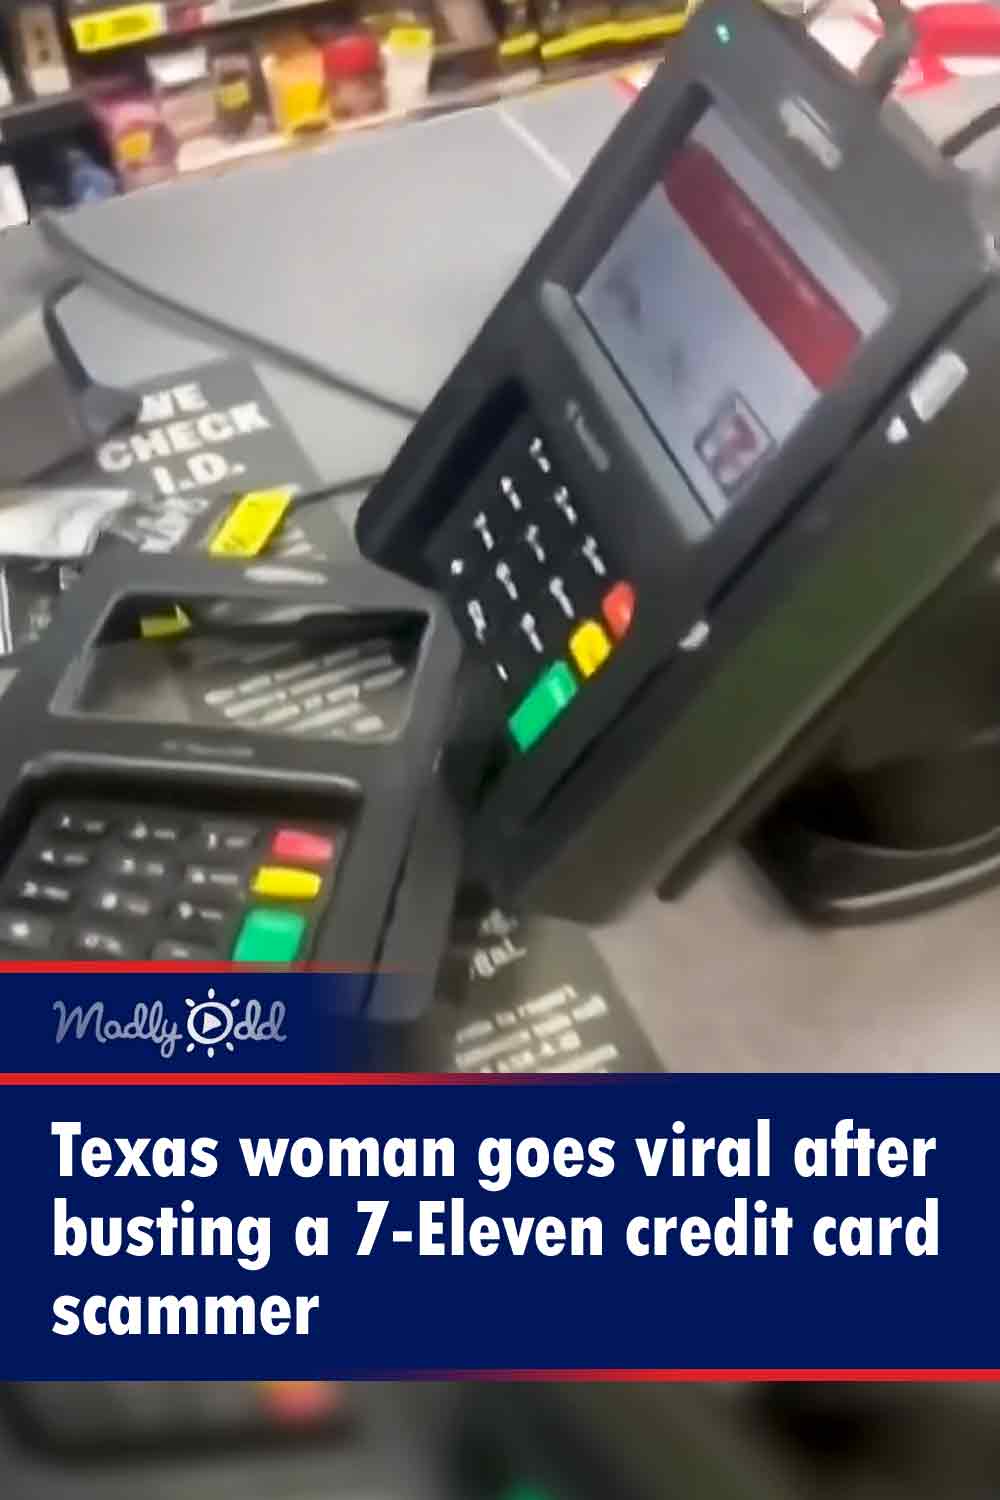 Texas woman goes viral after busting a 7-Eleven credit card scammer